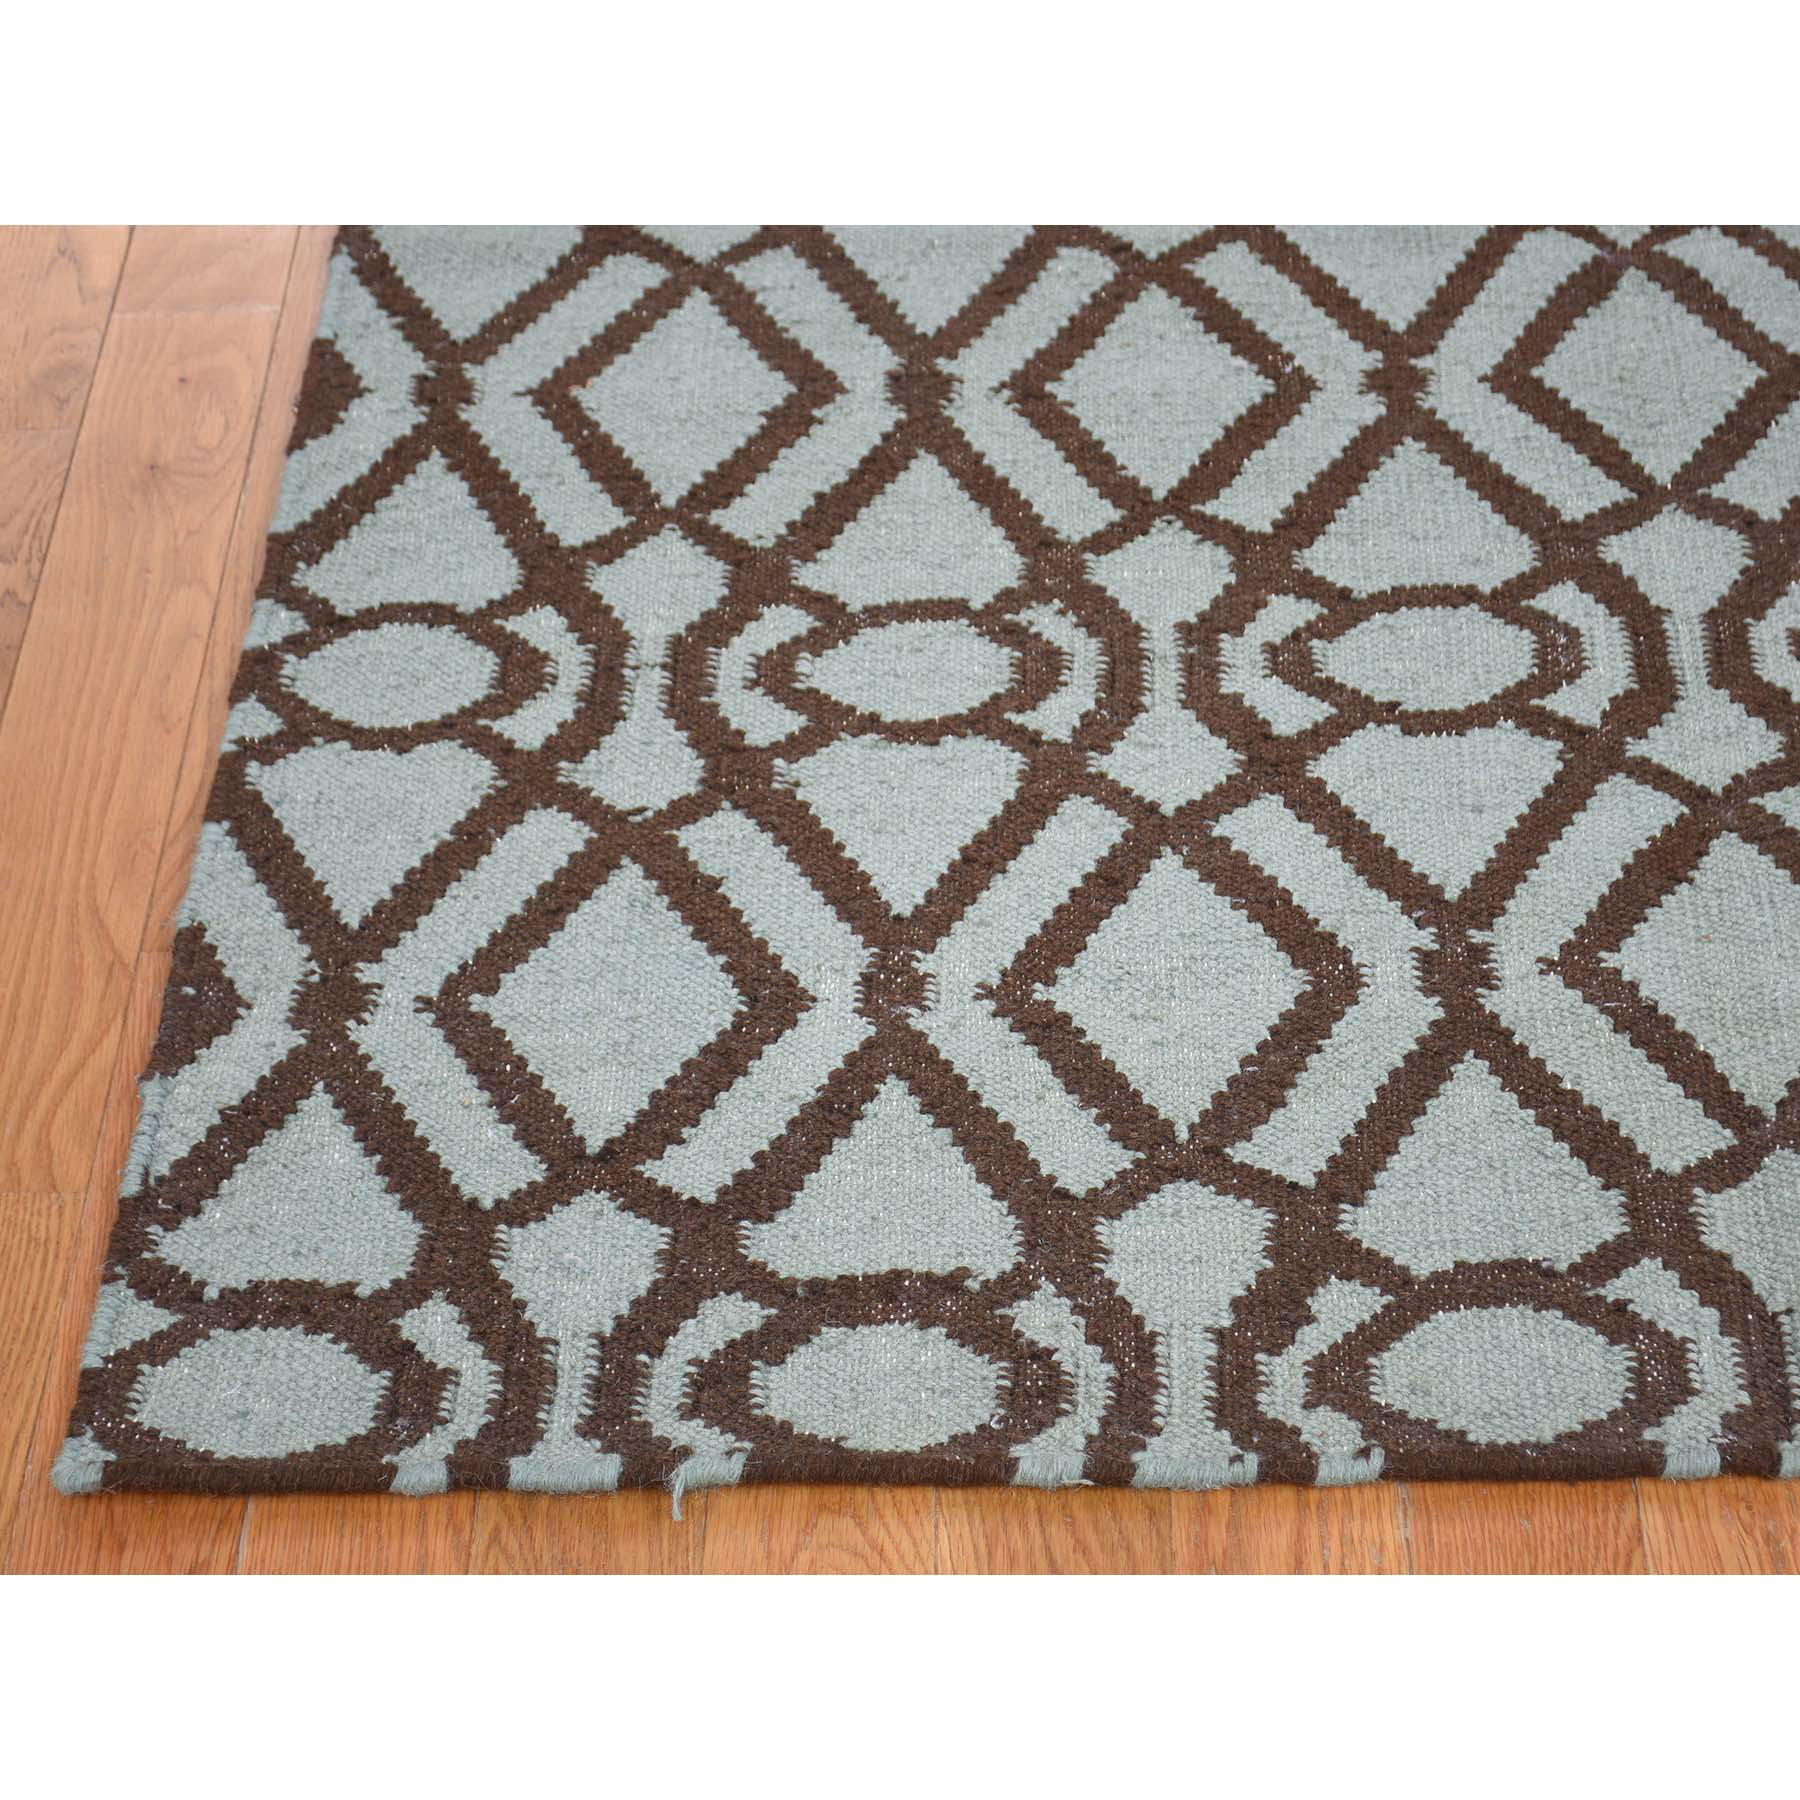 4-3--x5-10-- Hand Woven Light Green Durie Kilim Reversible Flat Weave Rug 